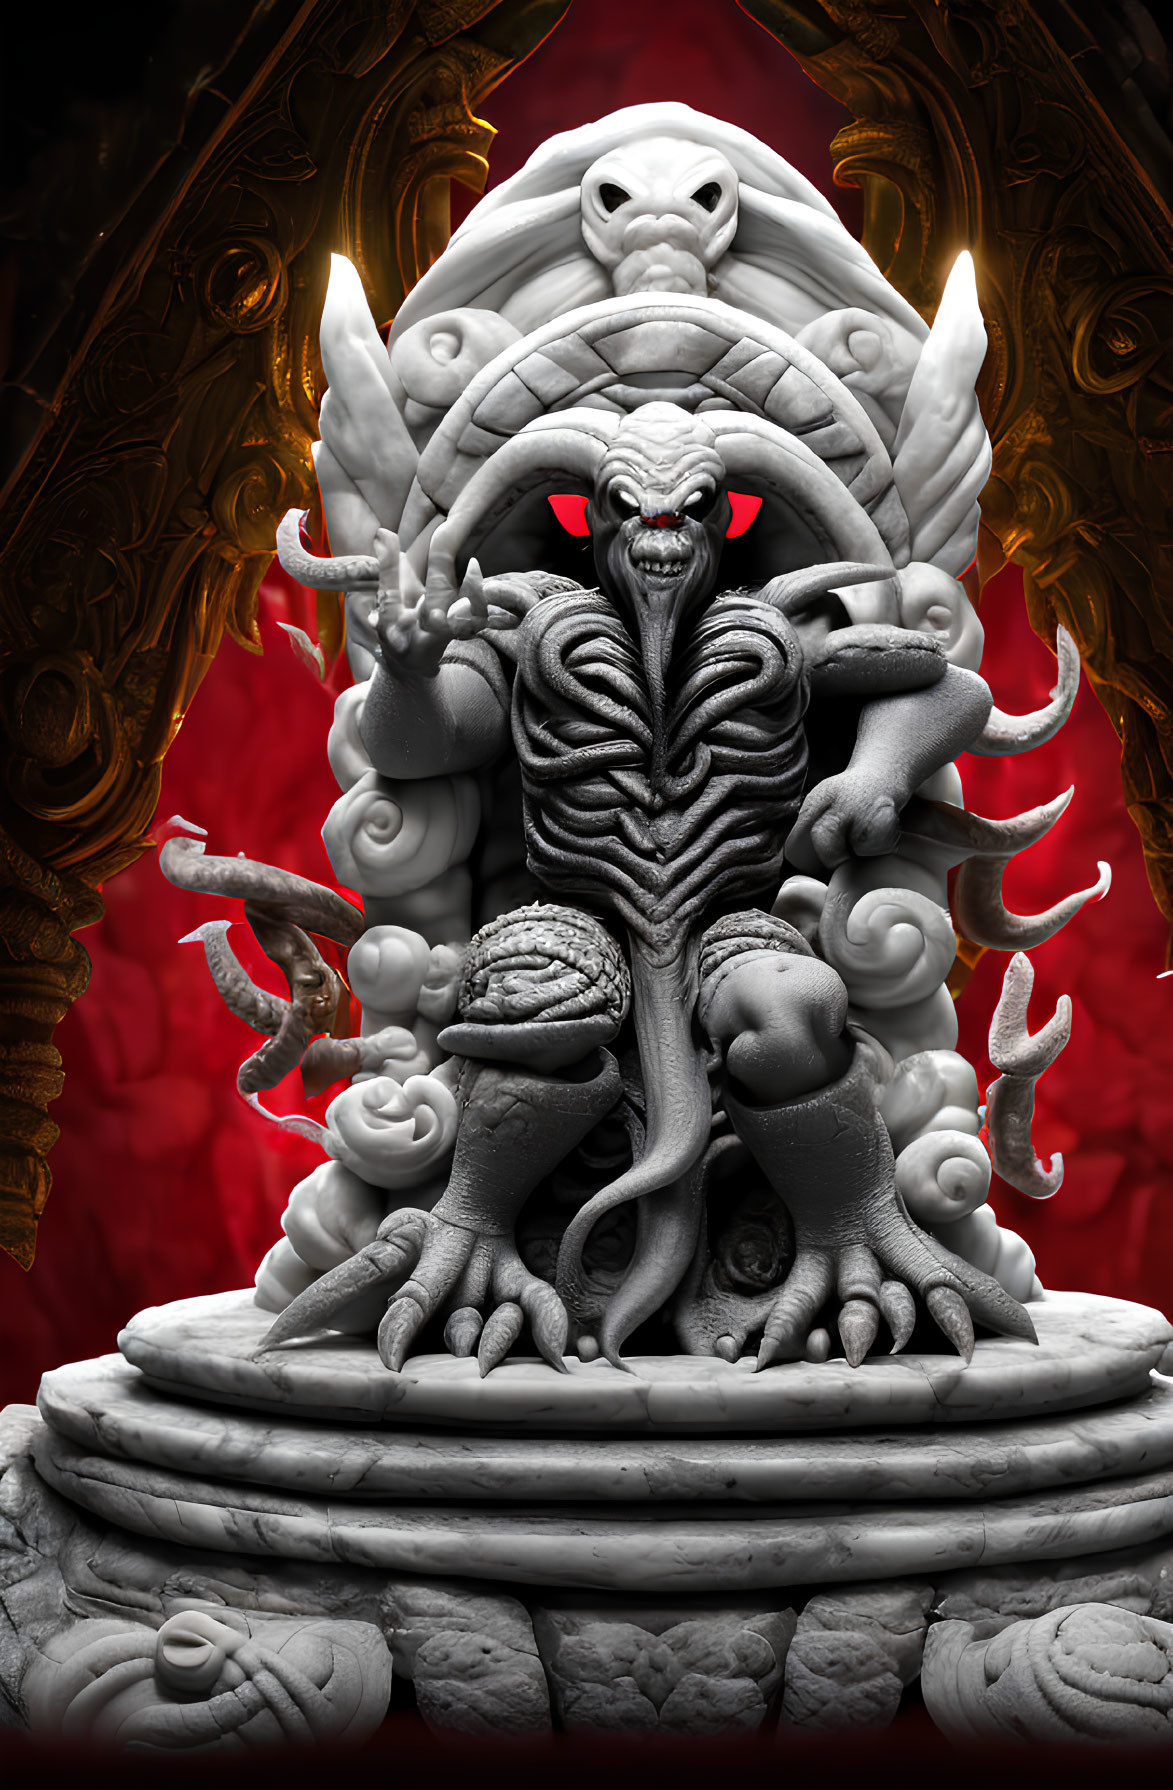 Monochrome statue of creature with tentacles, fangs, and serpent motifs, surrounded by candles on